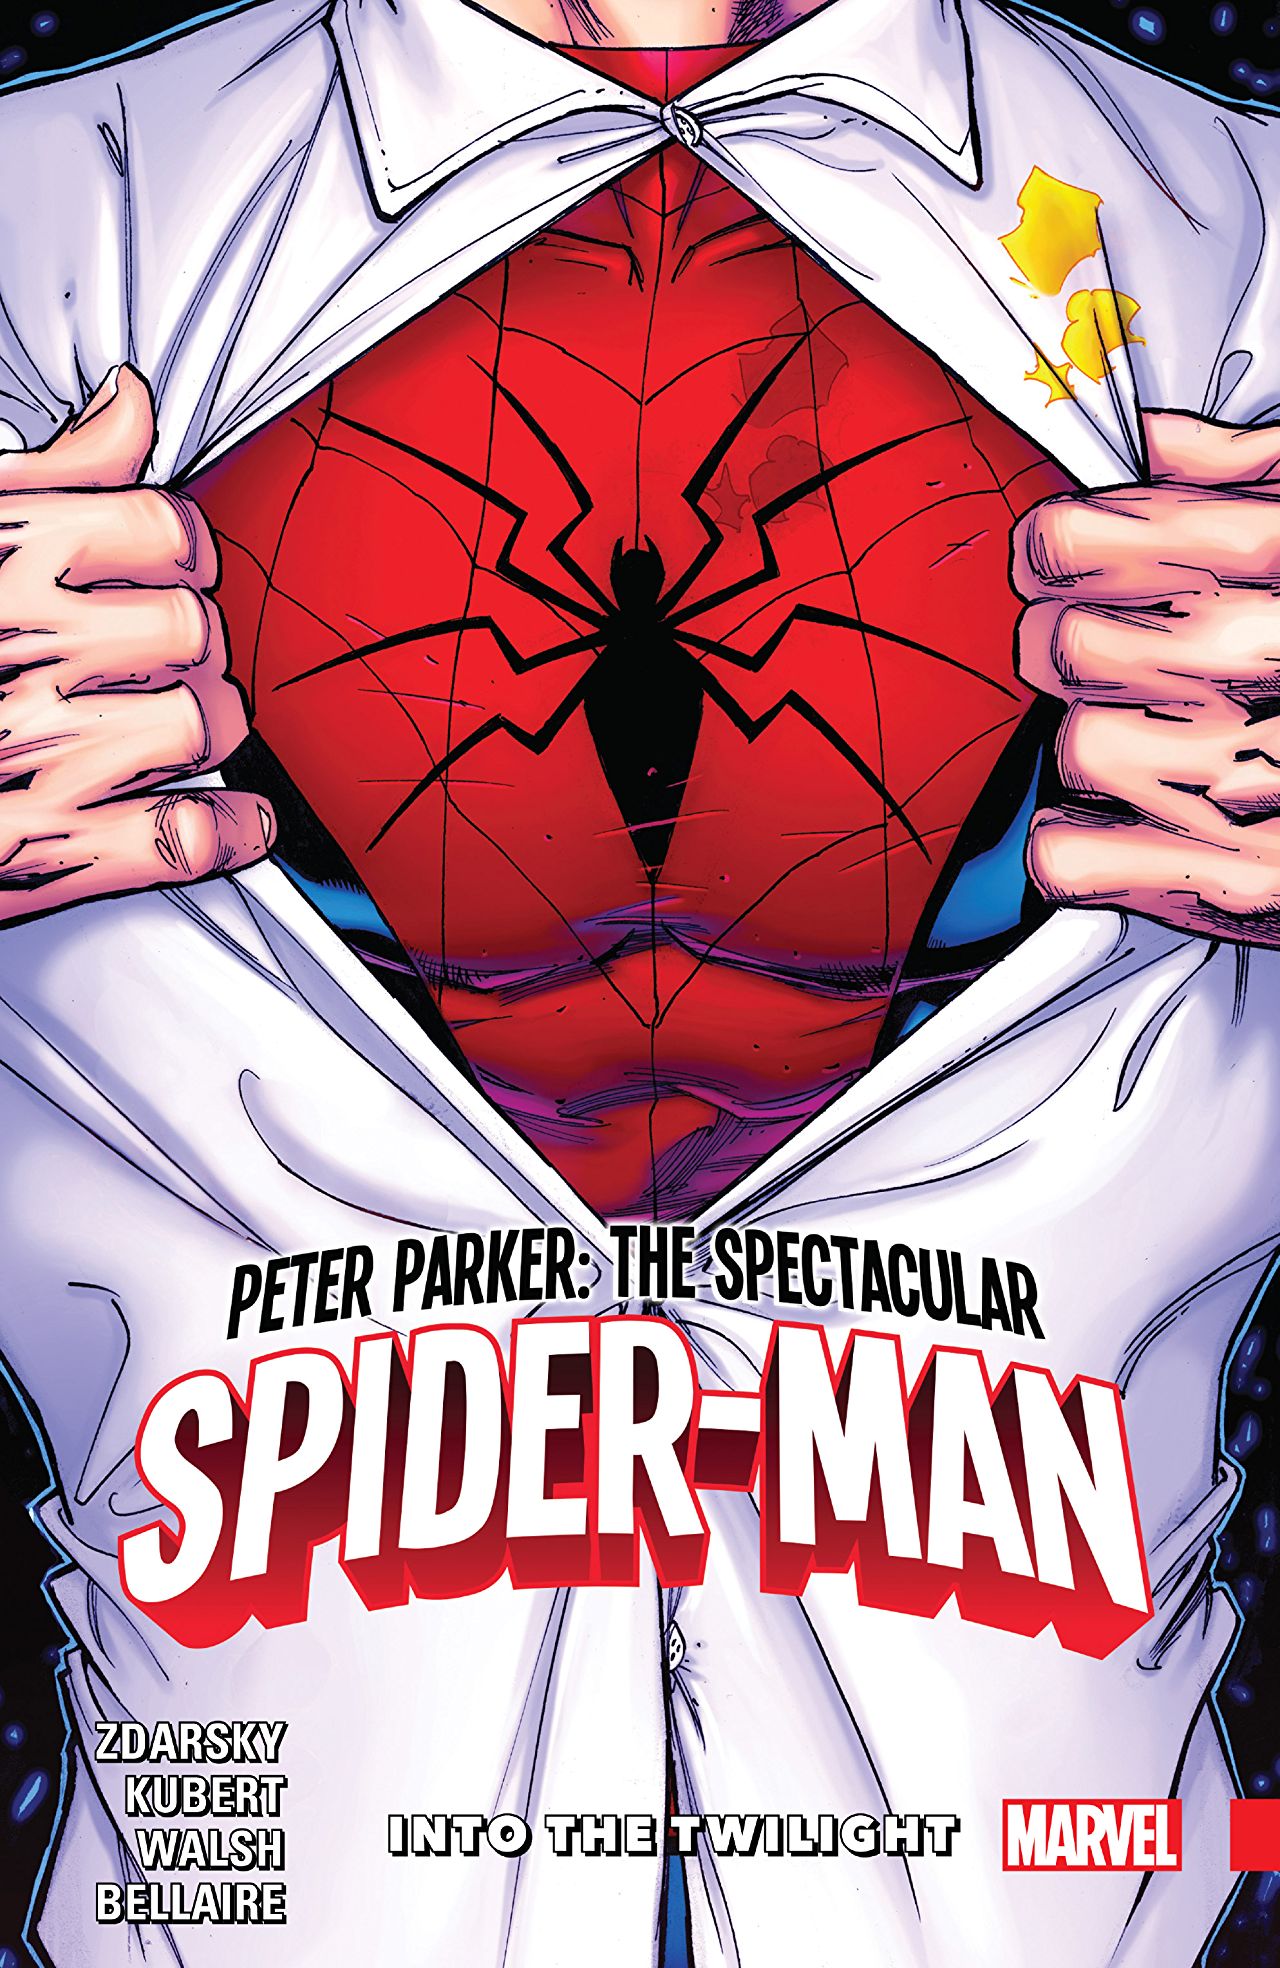 'Peter Parker: The Spectacular Spider-Man Vol. 1: Into the Twilight' review: Quip happy Spidey is back!